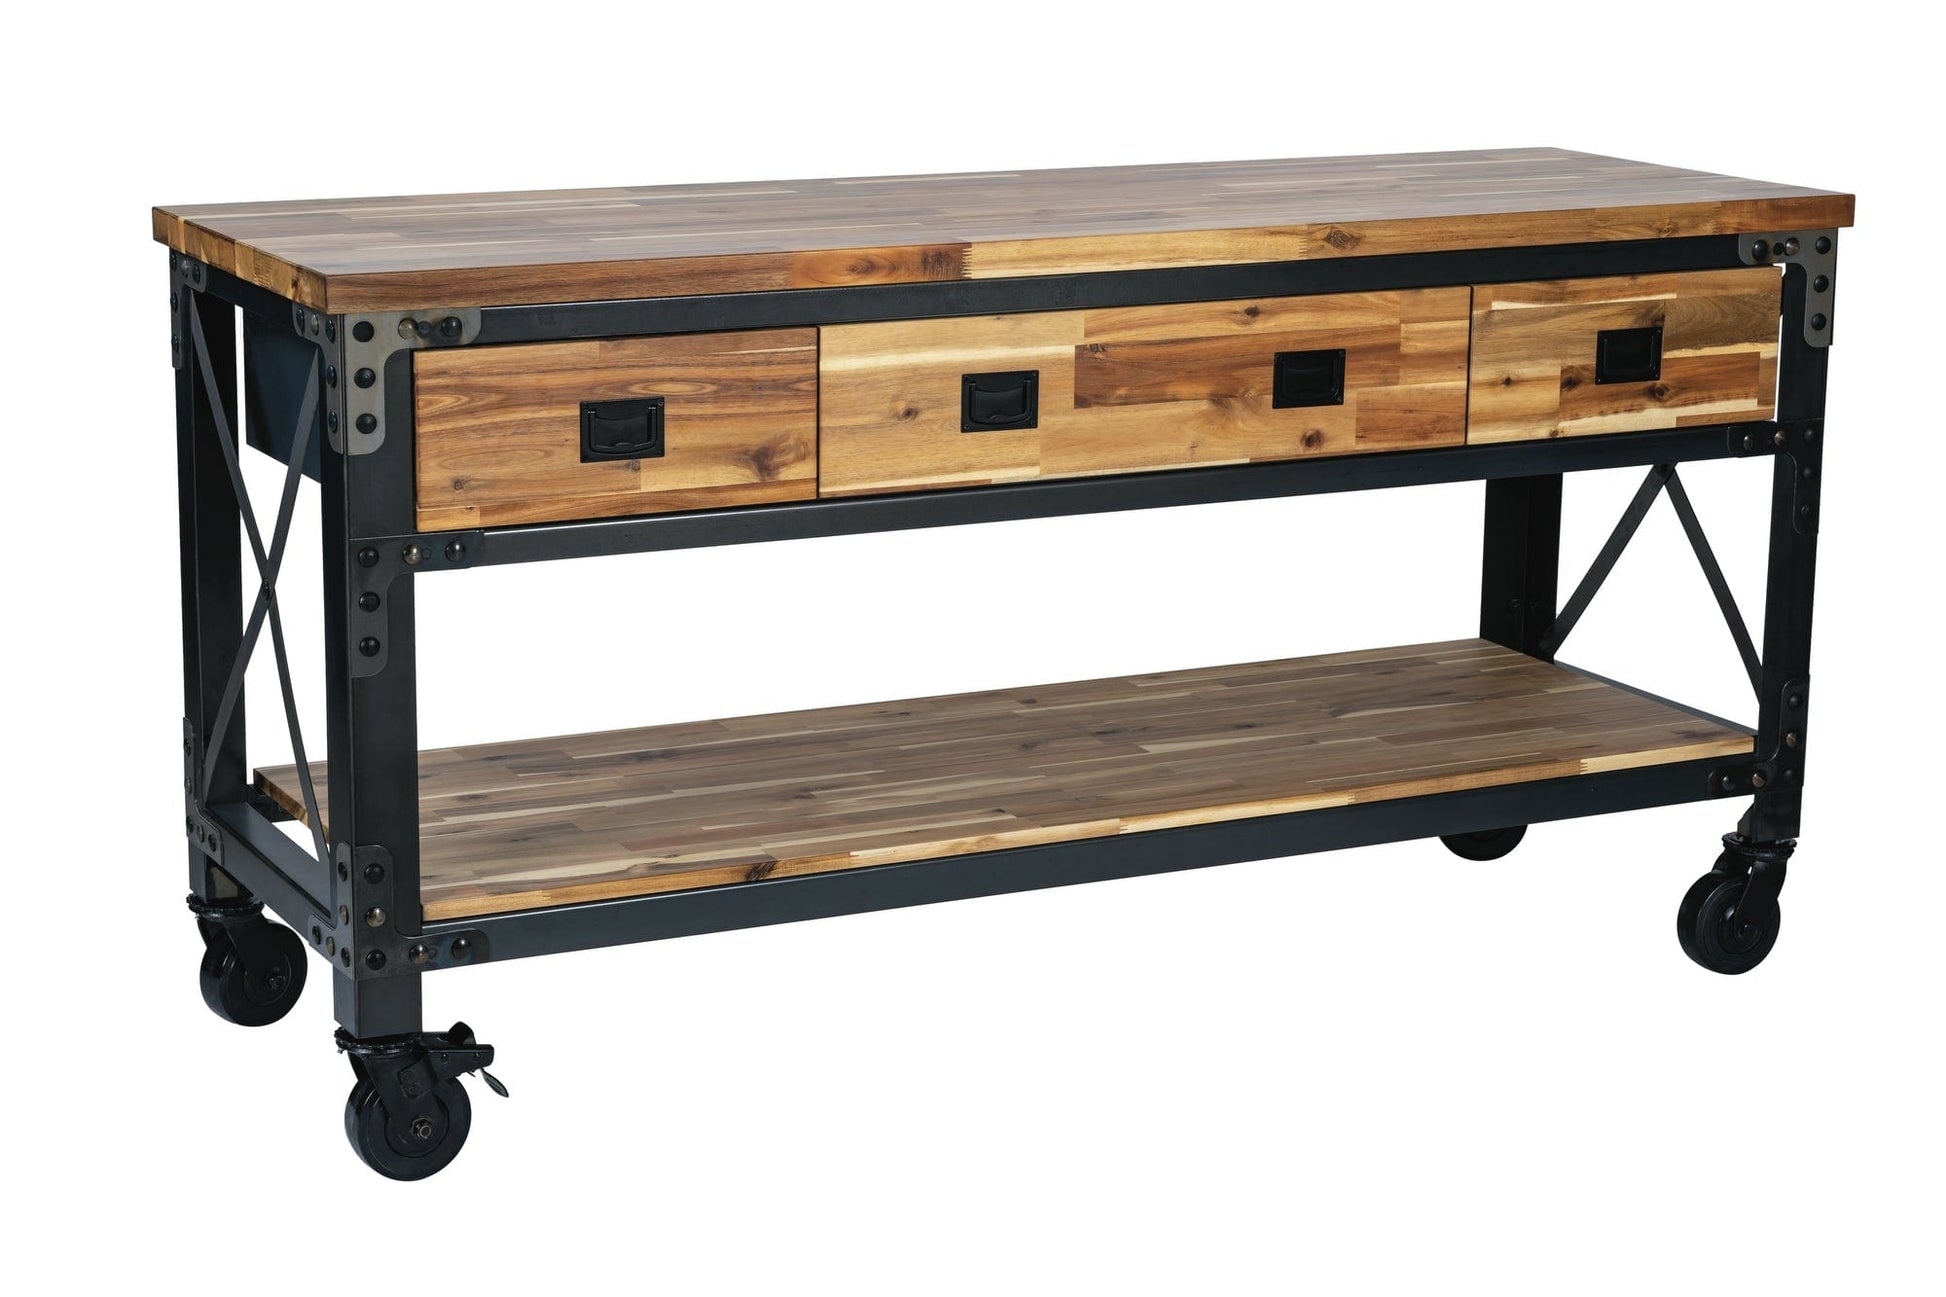 DuraMax 72 In Darby Industrial Metal & Wood kitchen island desk with drawers